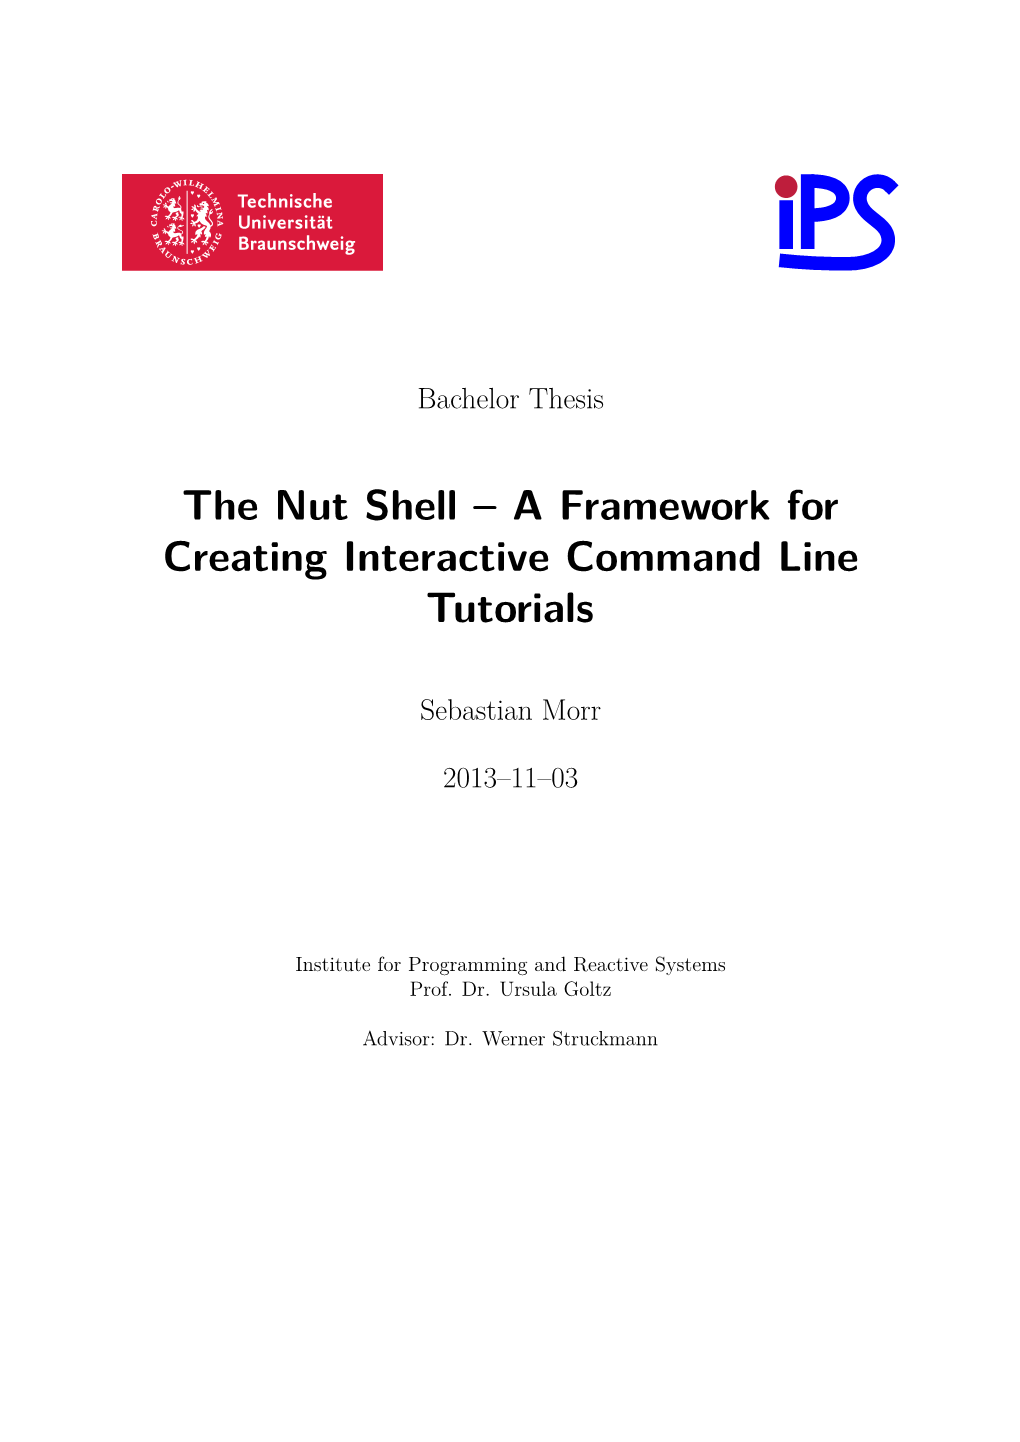 The Nut Shell – a Framework for Creating Interactive Command Line Tutorials